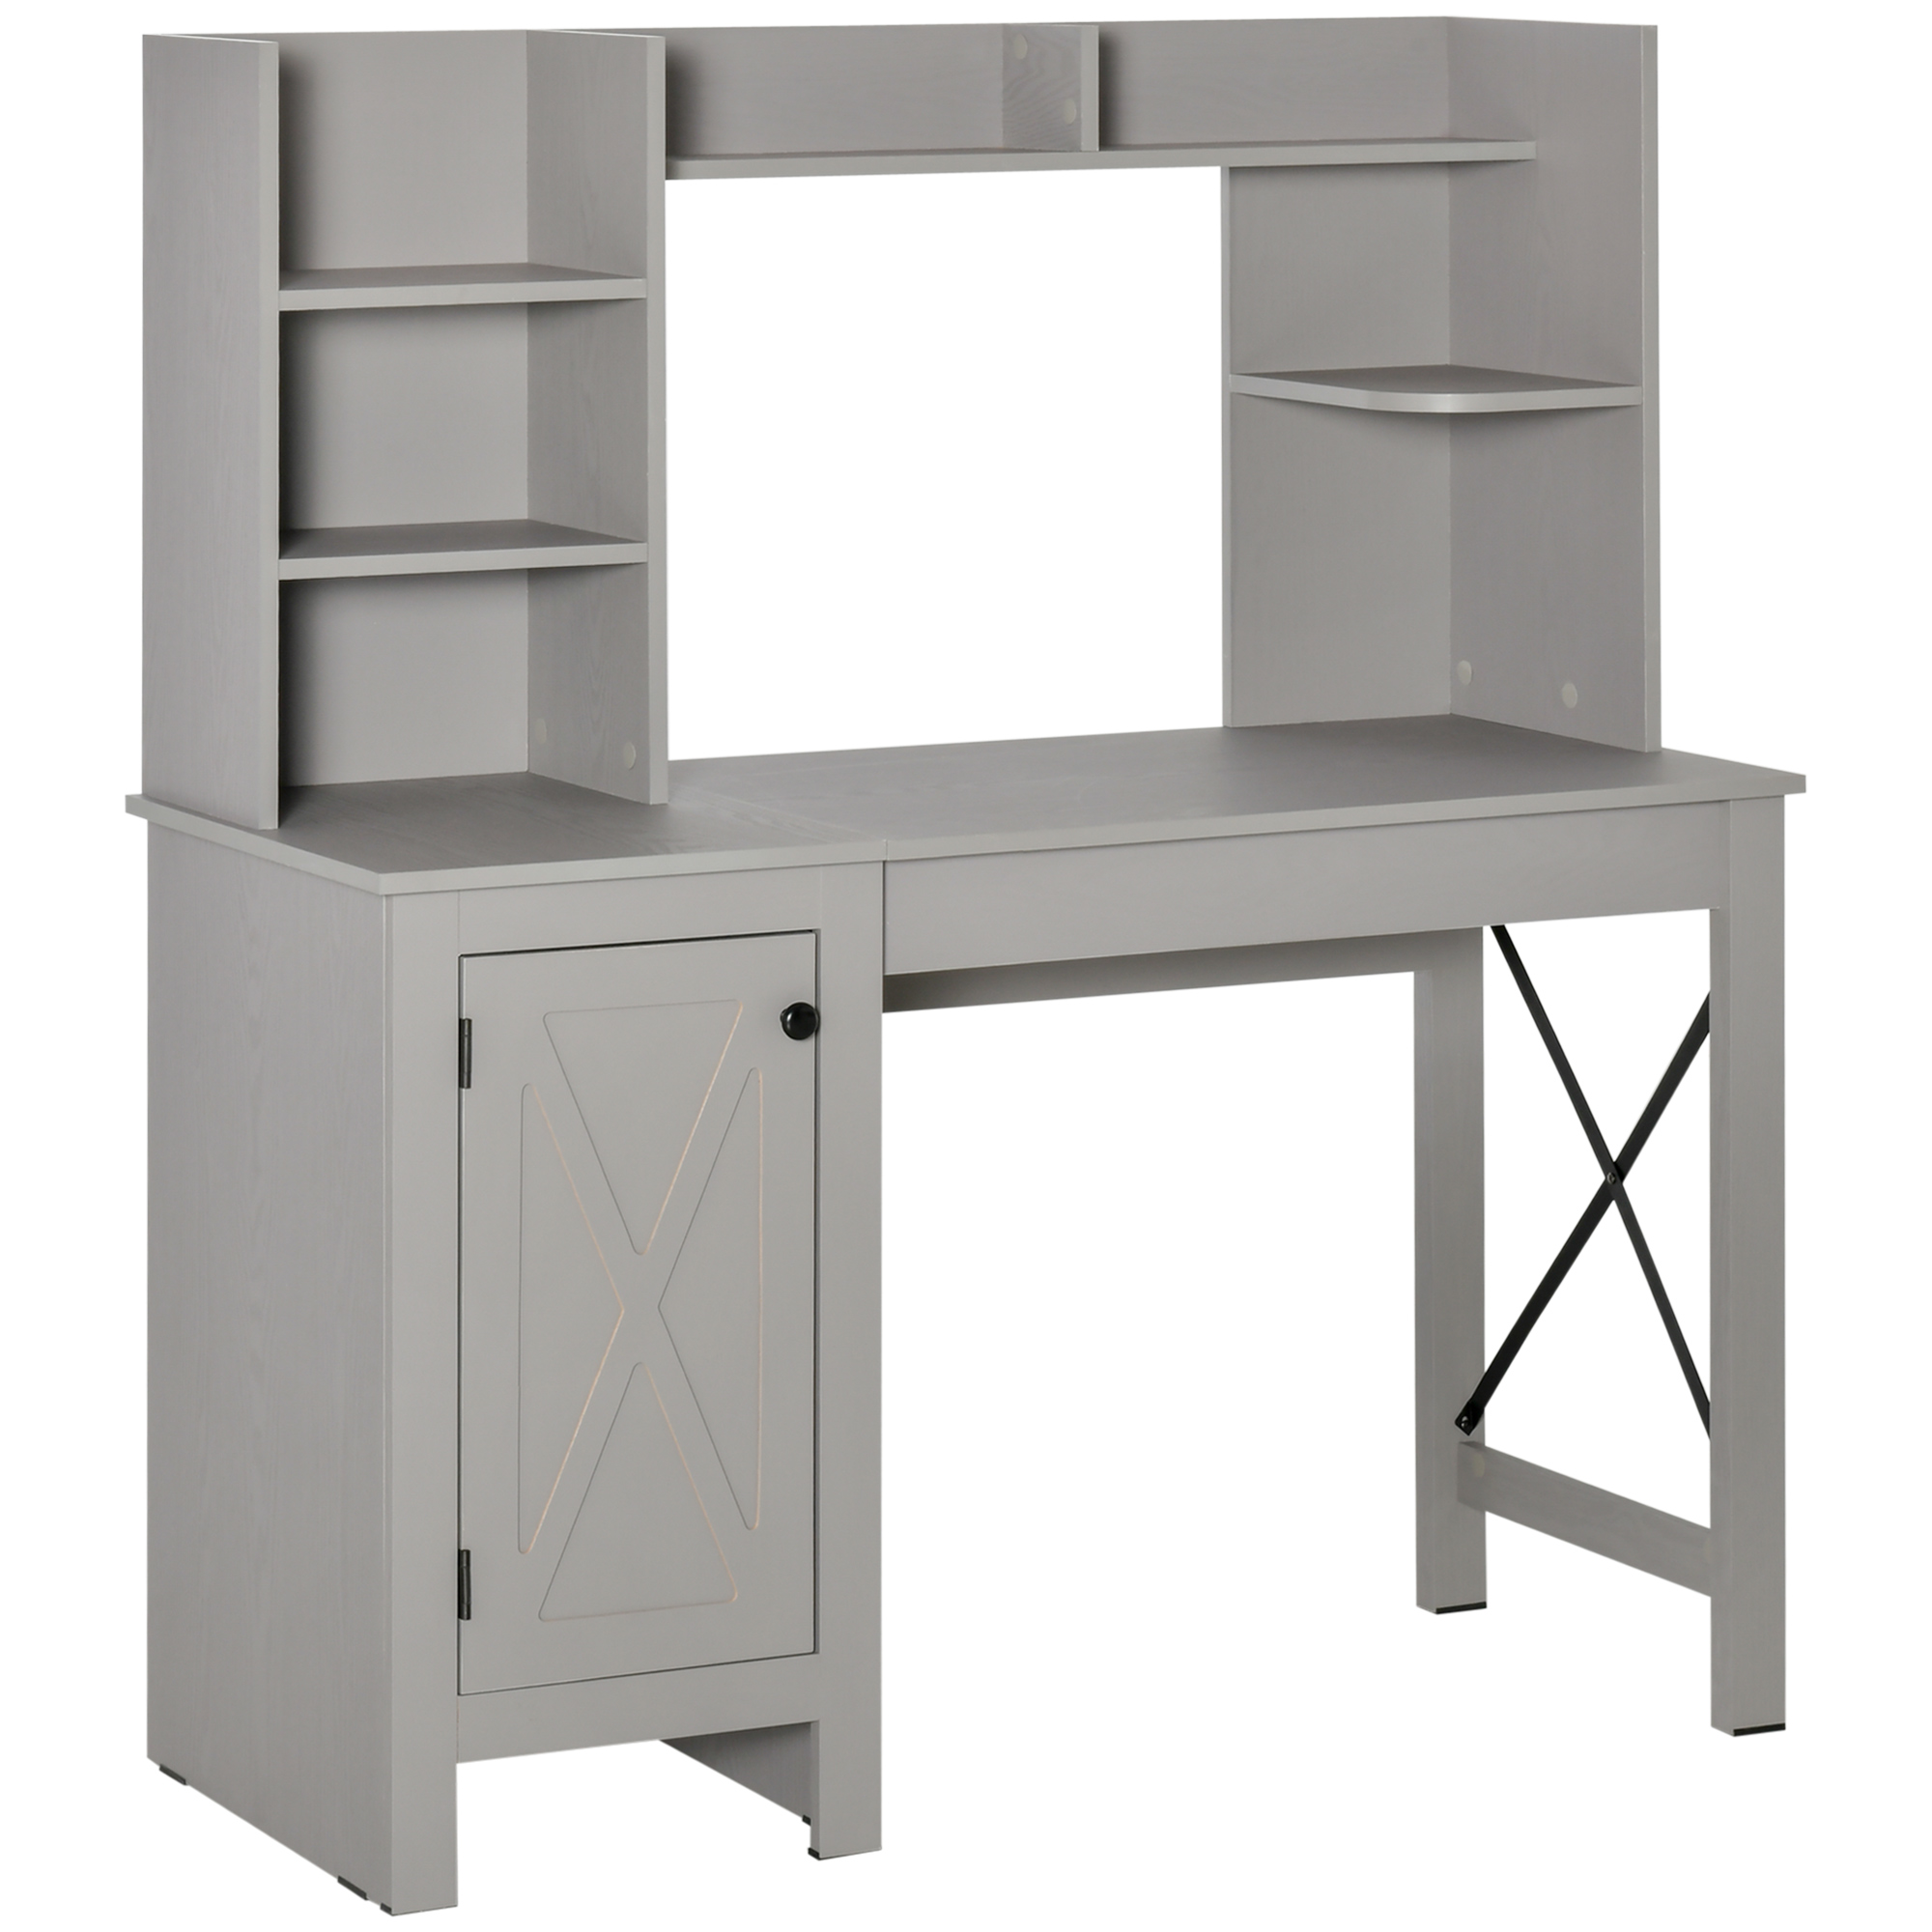 HOMCOM Farmhouse Computer Desk with Hutch and Cabinet, Home office Desk with Storage, for Study, Light Grey - image 1 of 9